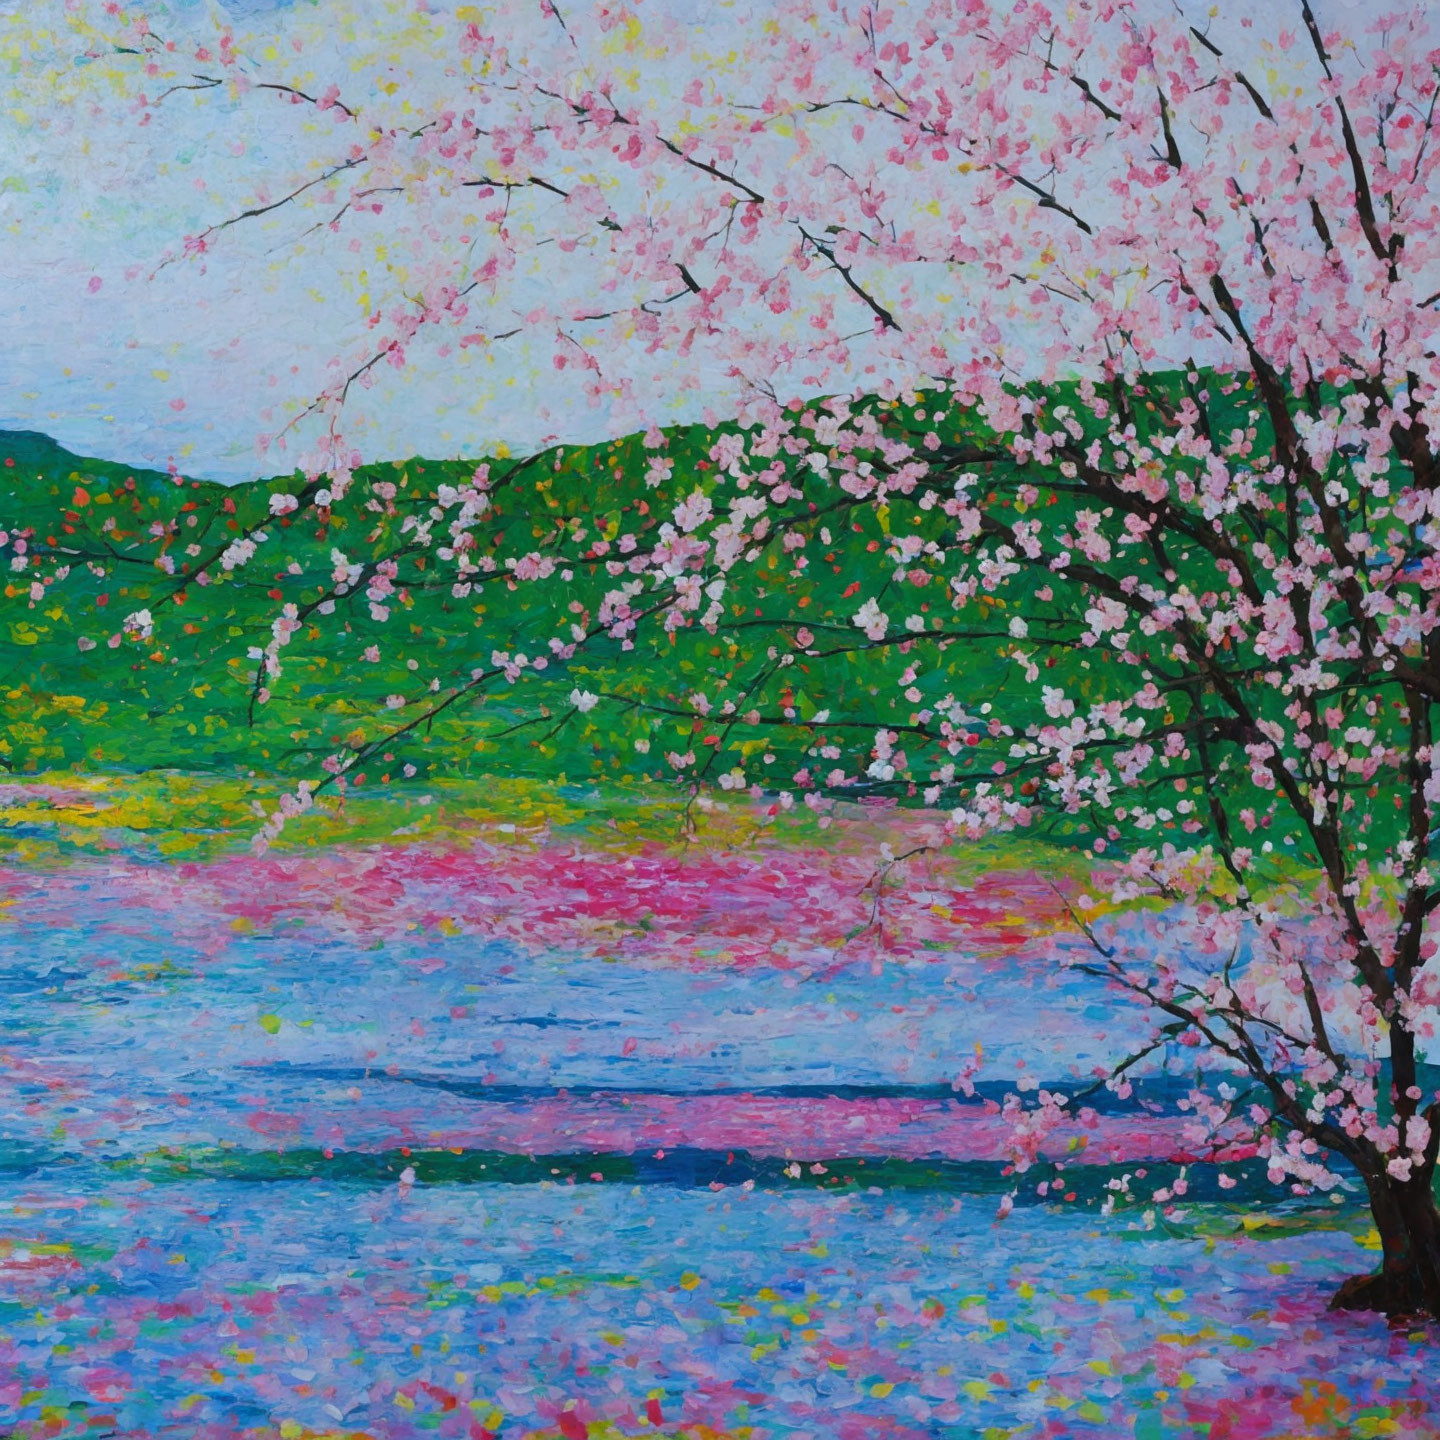 Impressionistic painting of cherry blossoms by blue river